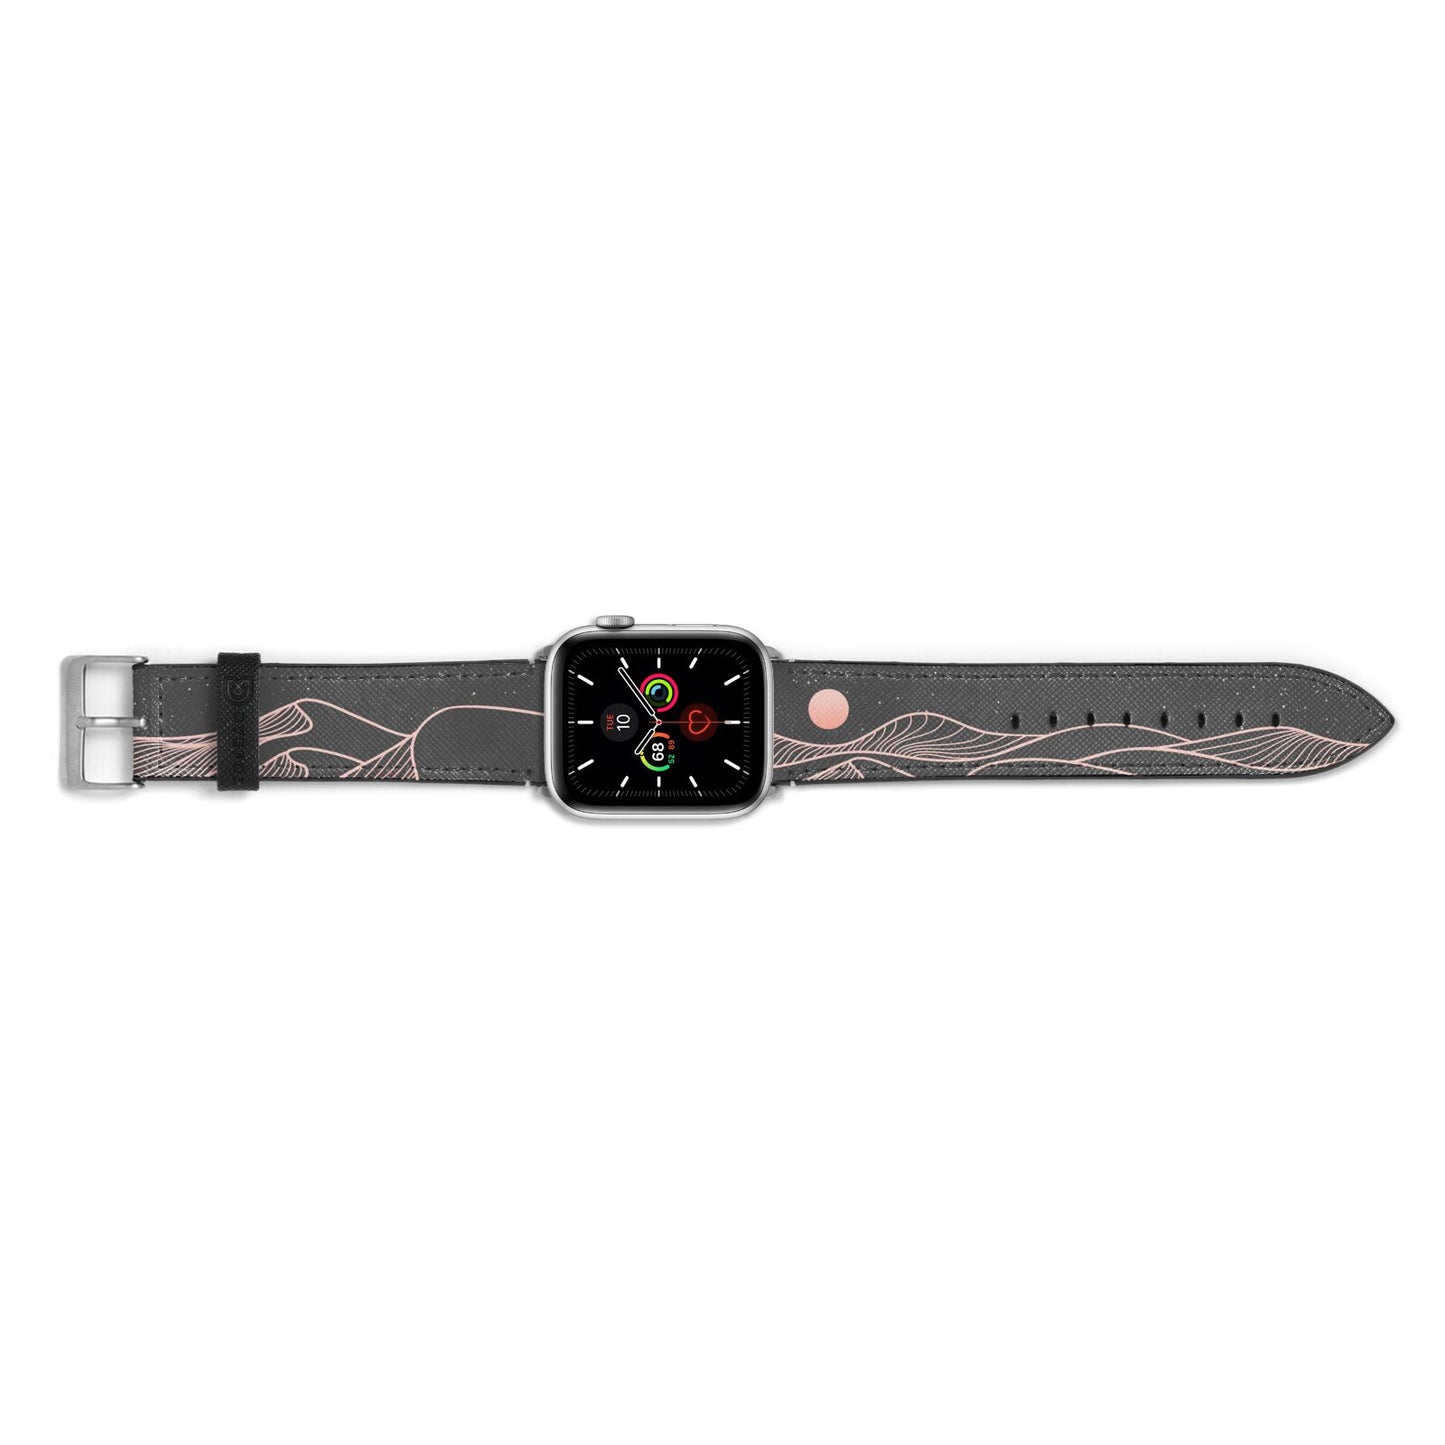 Abstract Sunset Apple Watch Strap Landscape Image Silver Hardware